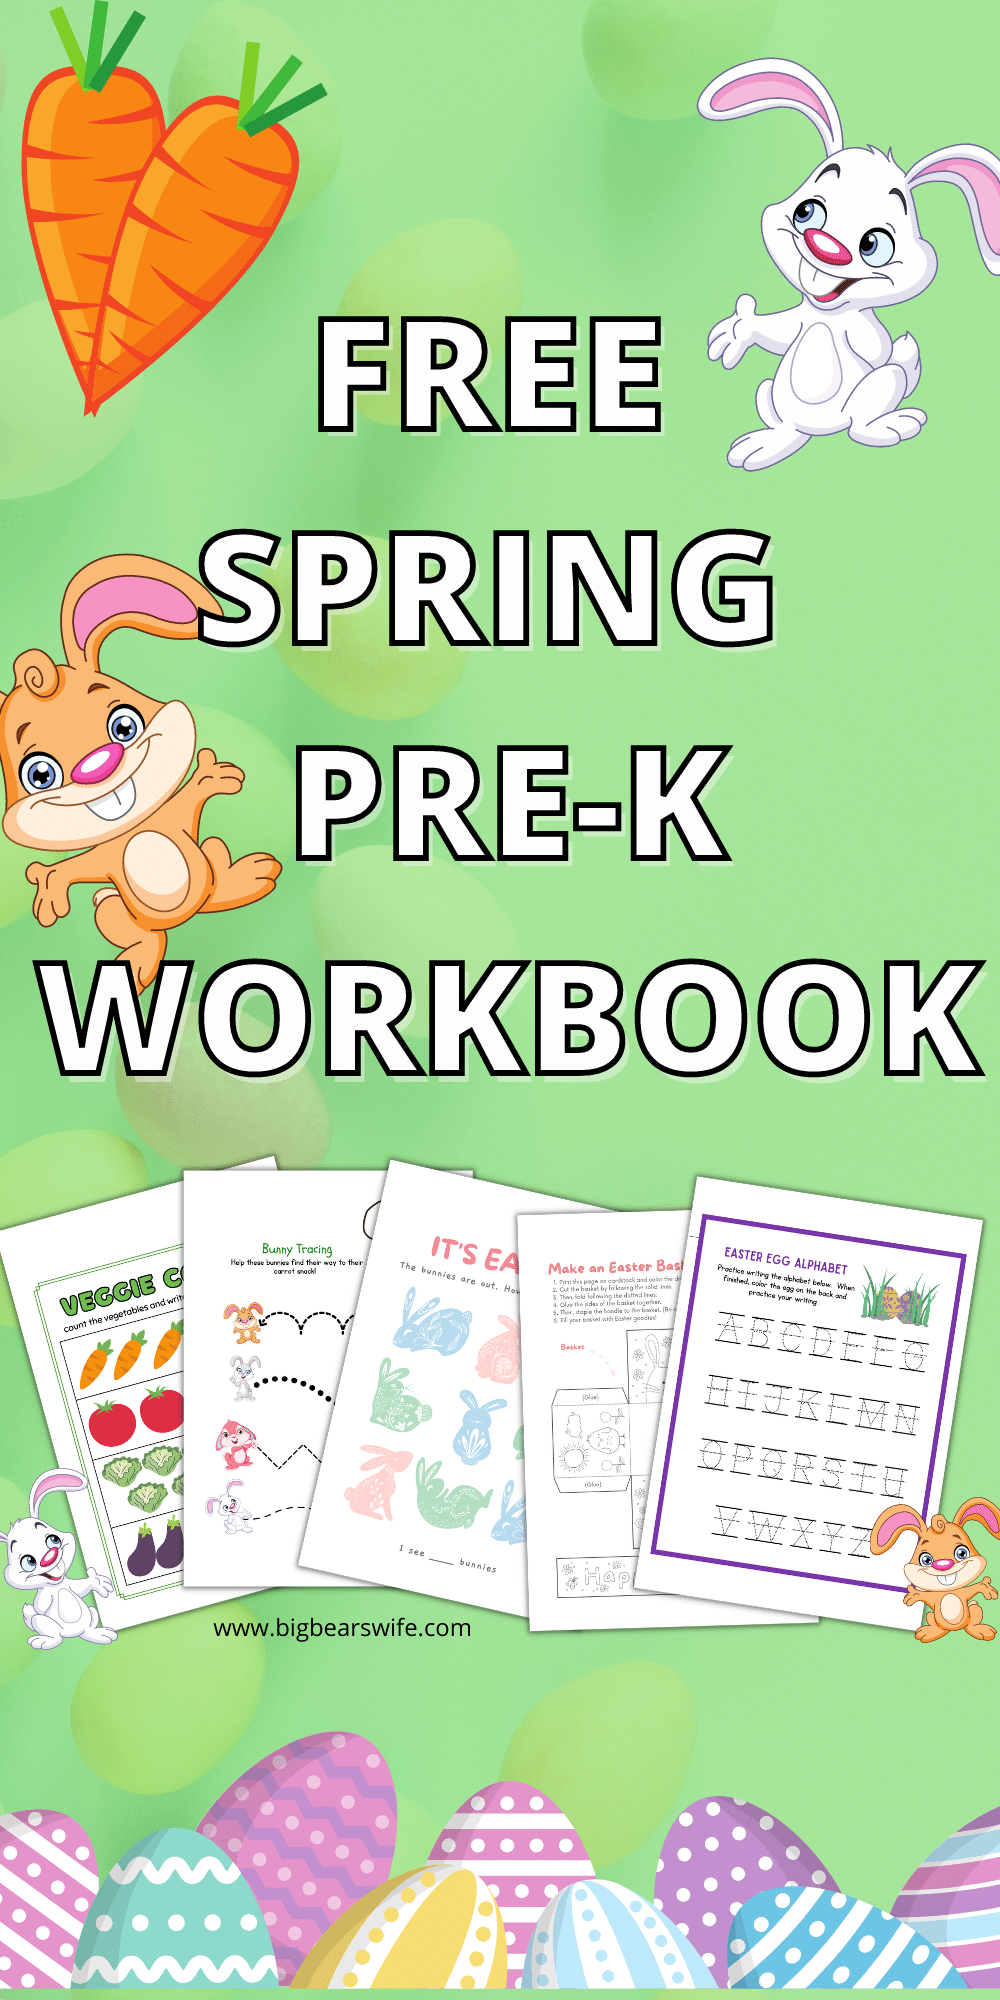 Is your little one in Preschool? If you are looking for a little workbook for them to practice writing their name or coloring, I've got a free one for you! via @bigbearswife